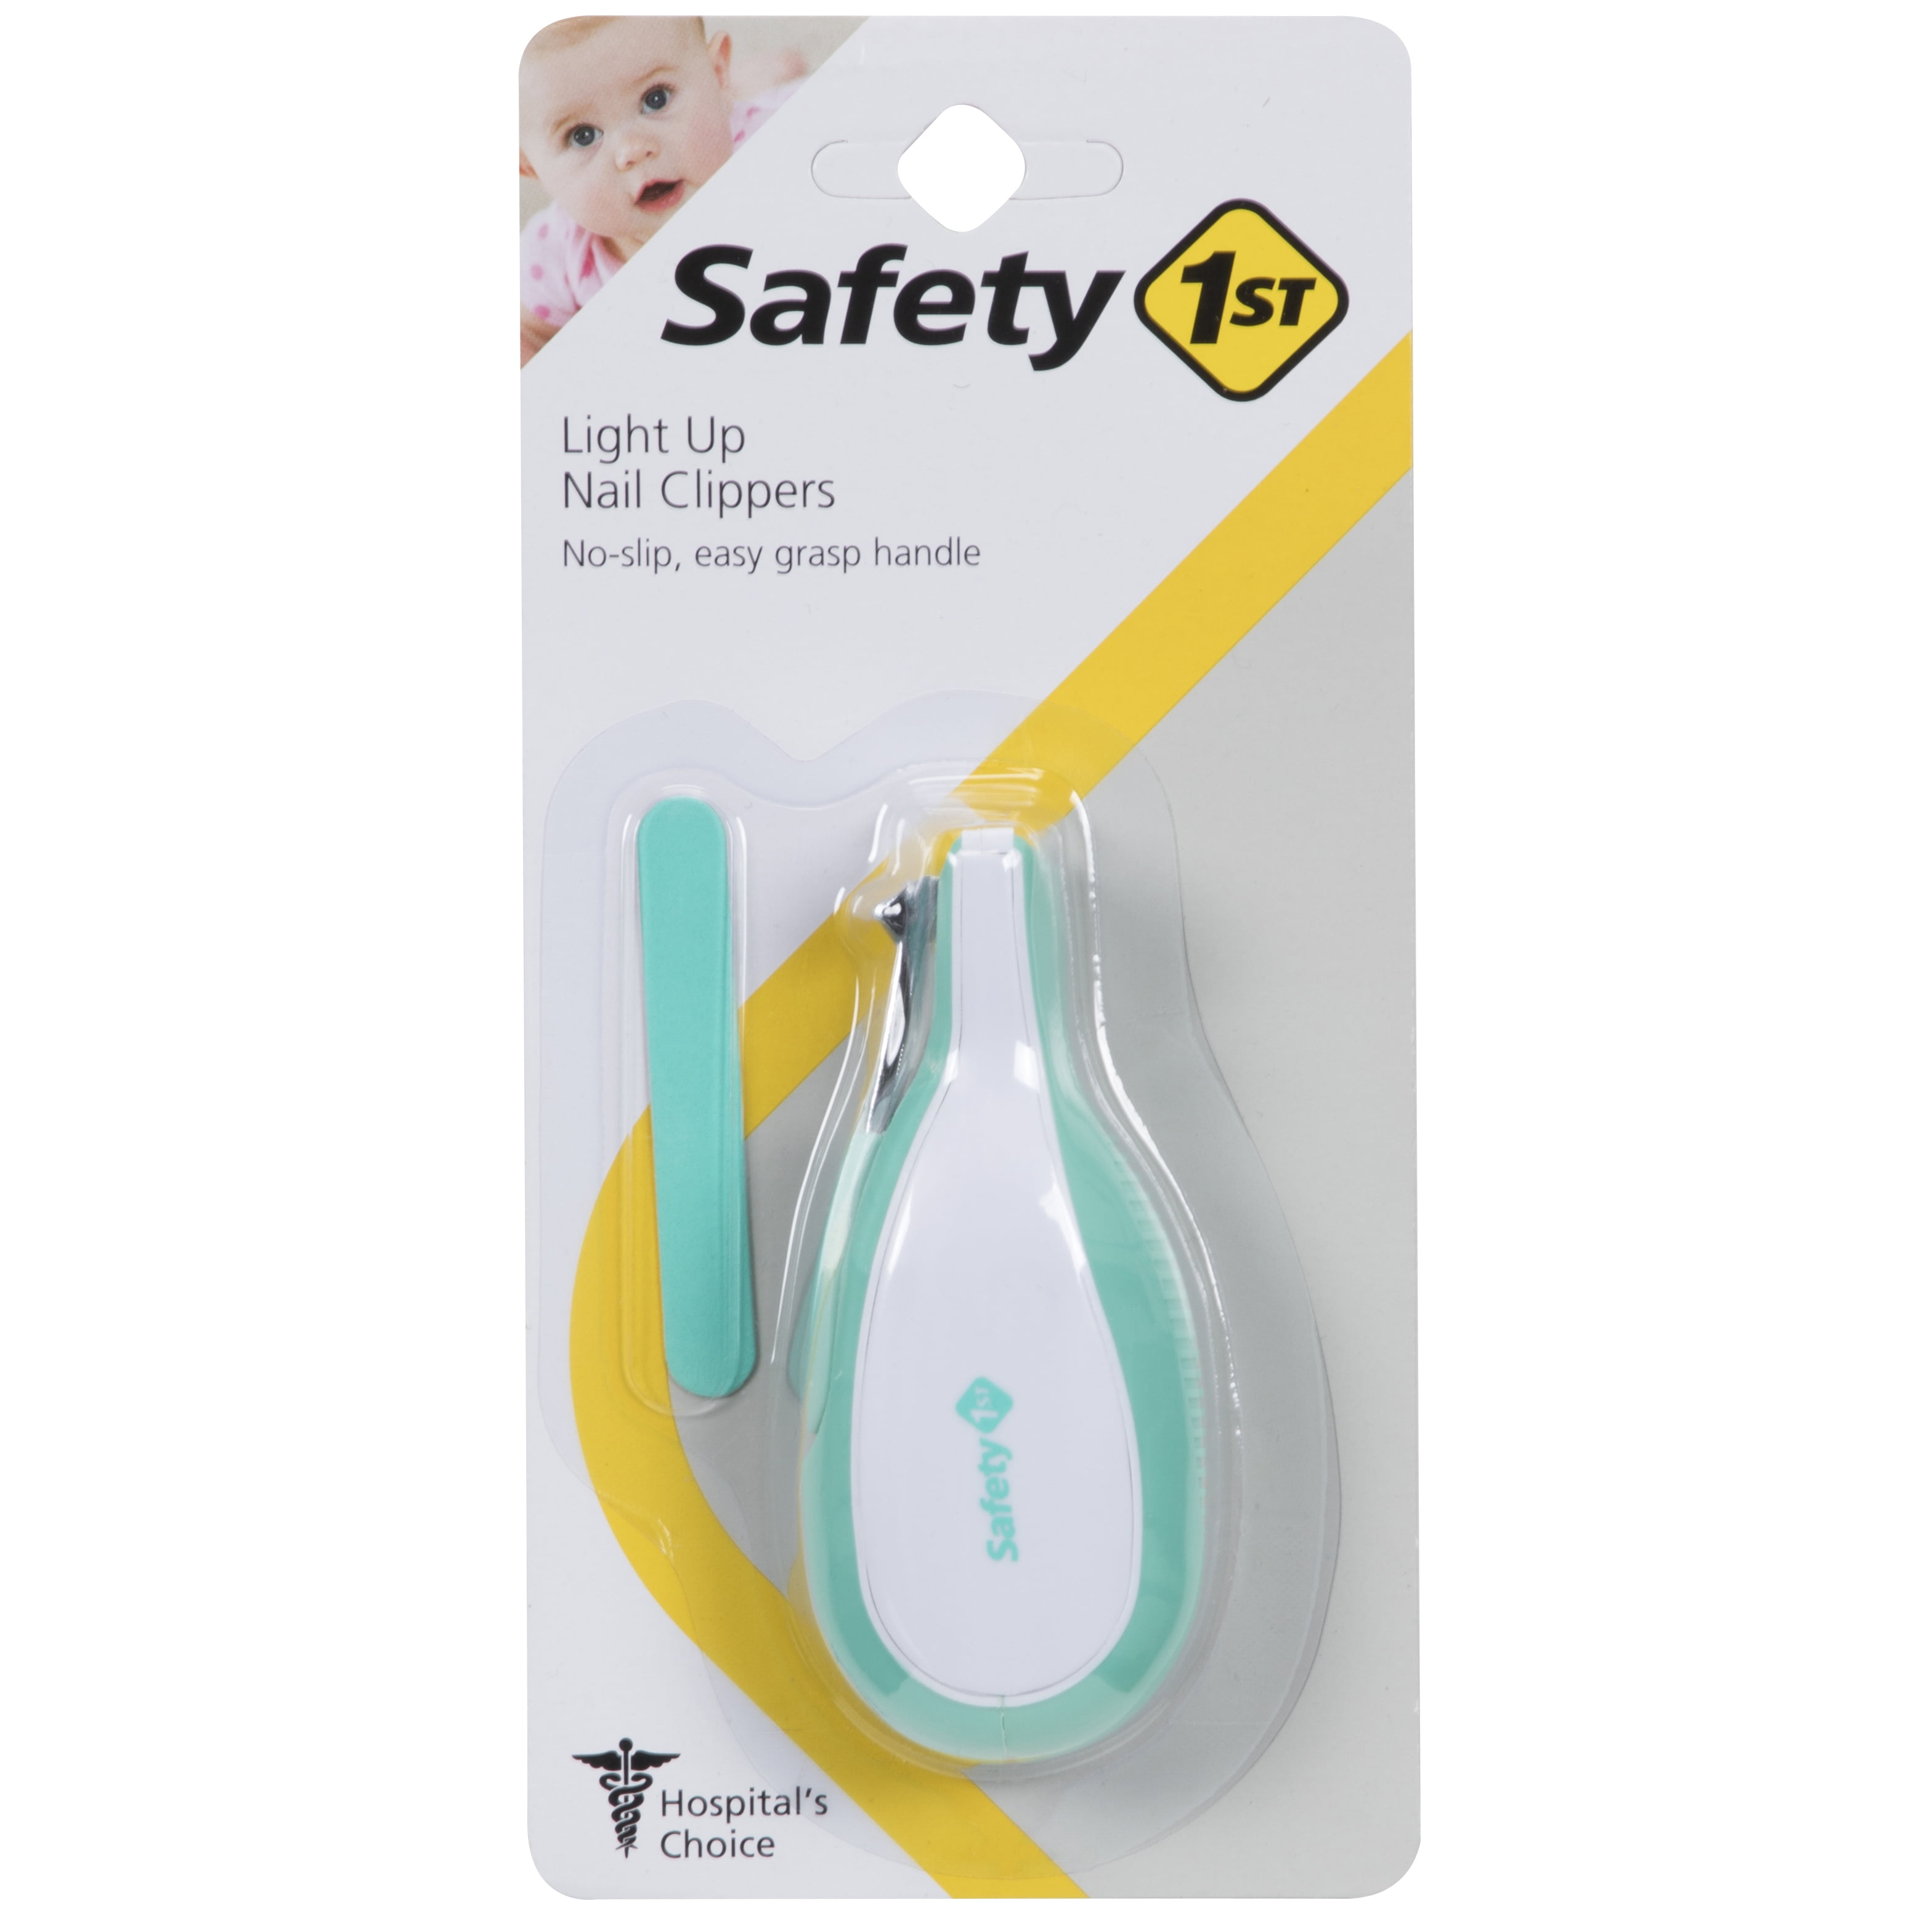 safety 1st nail clippers